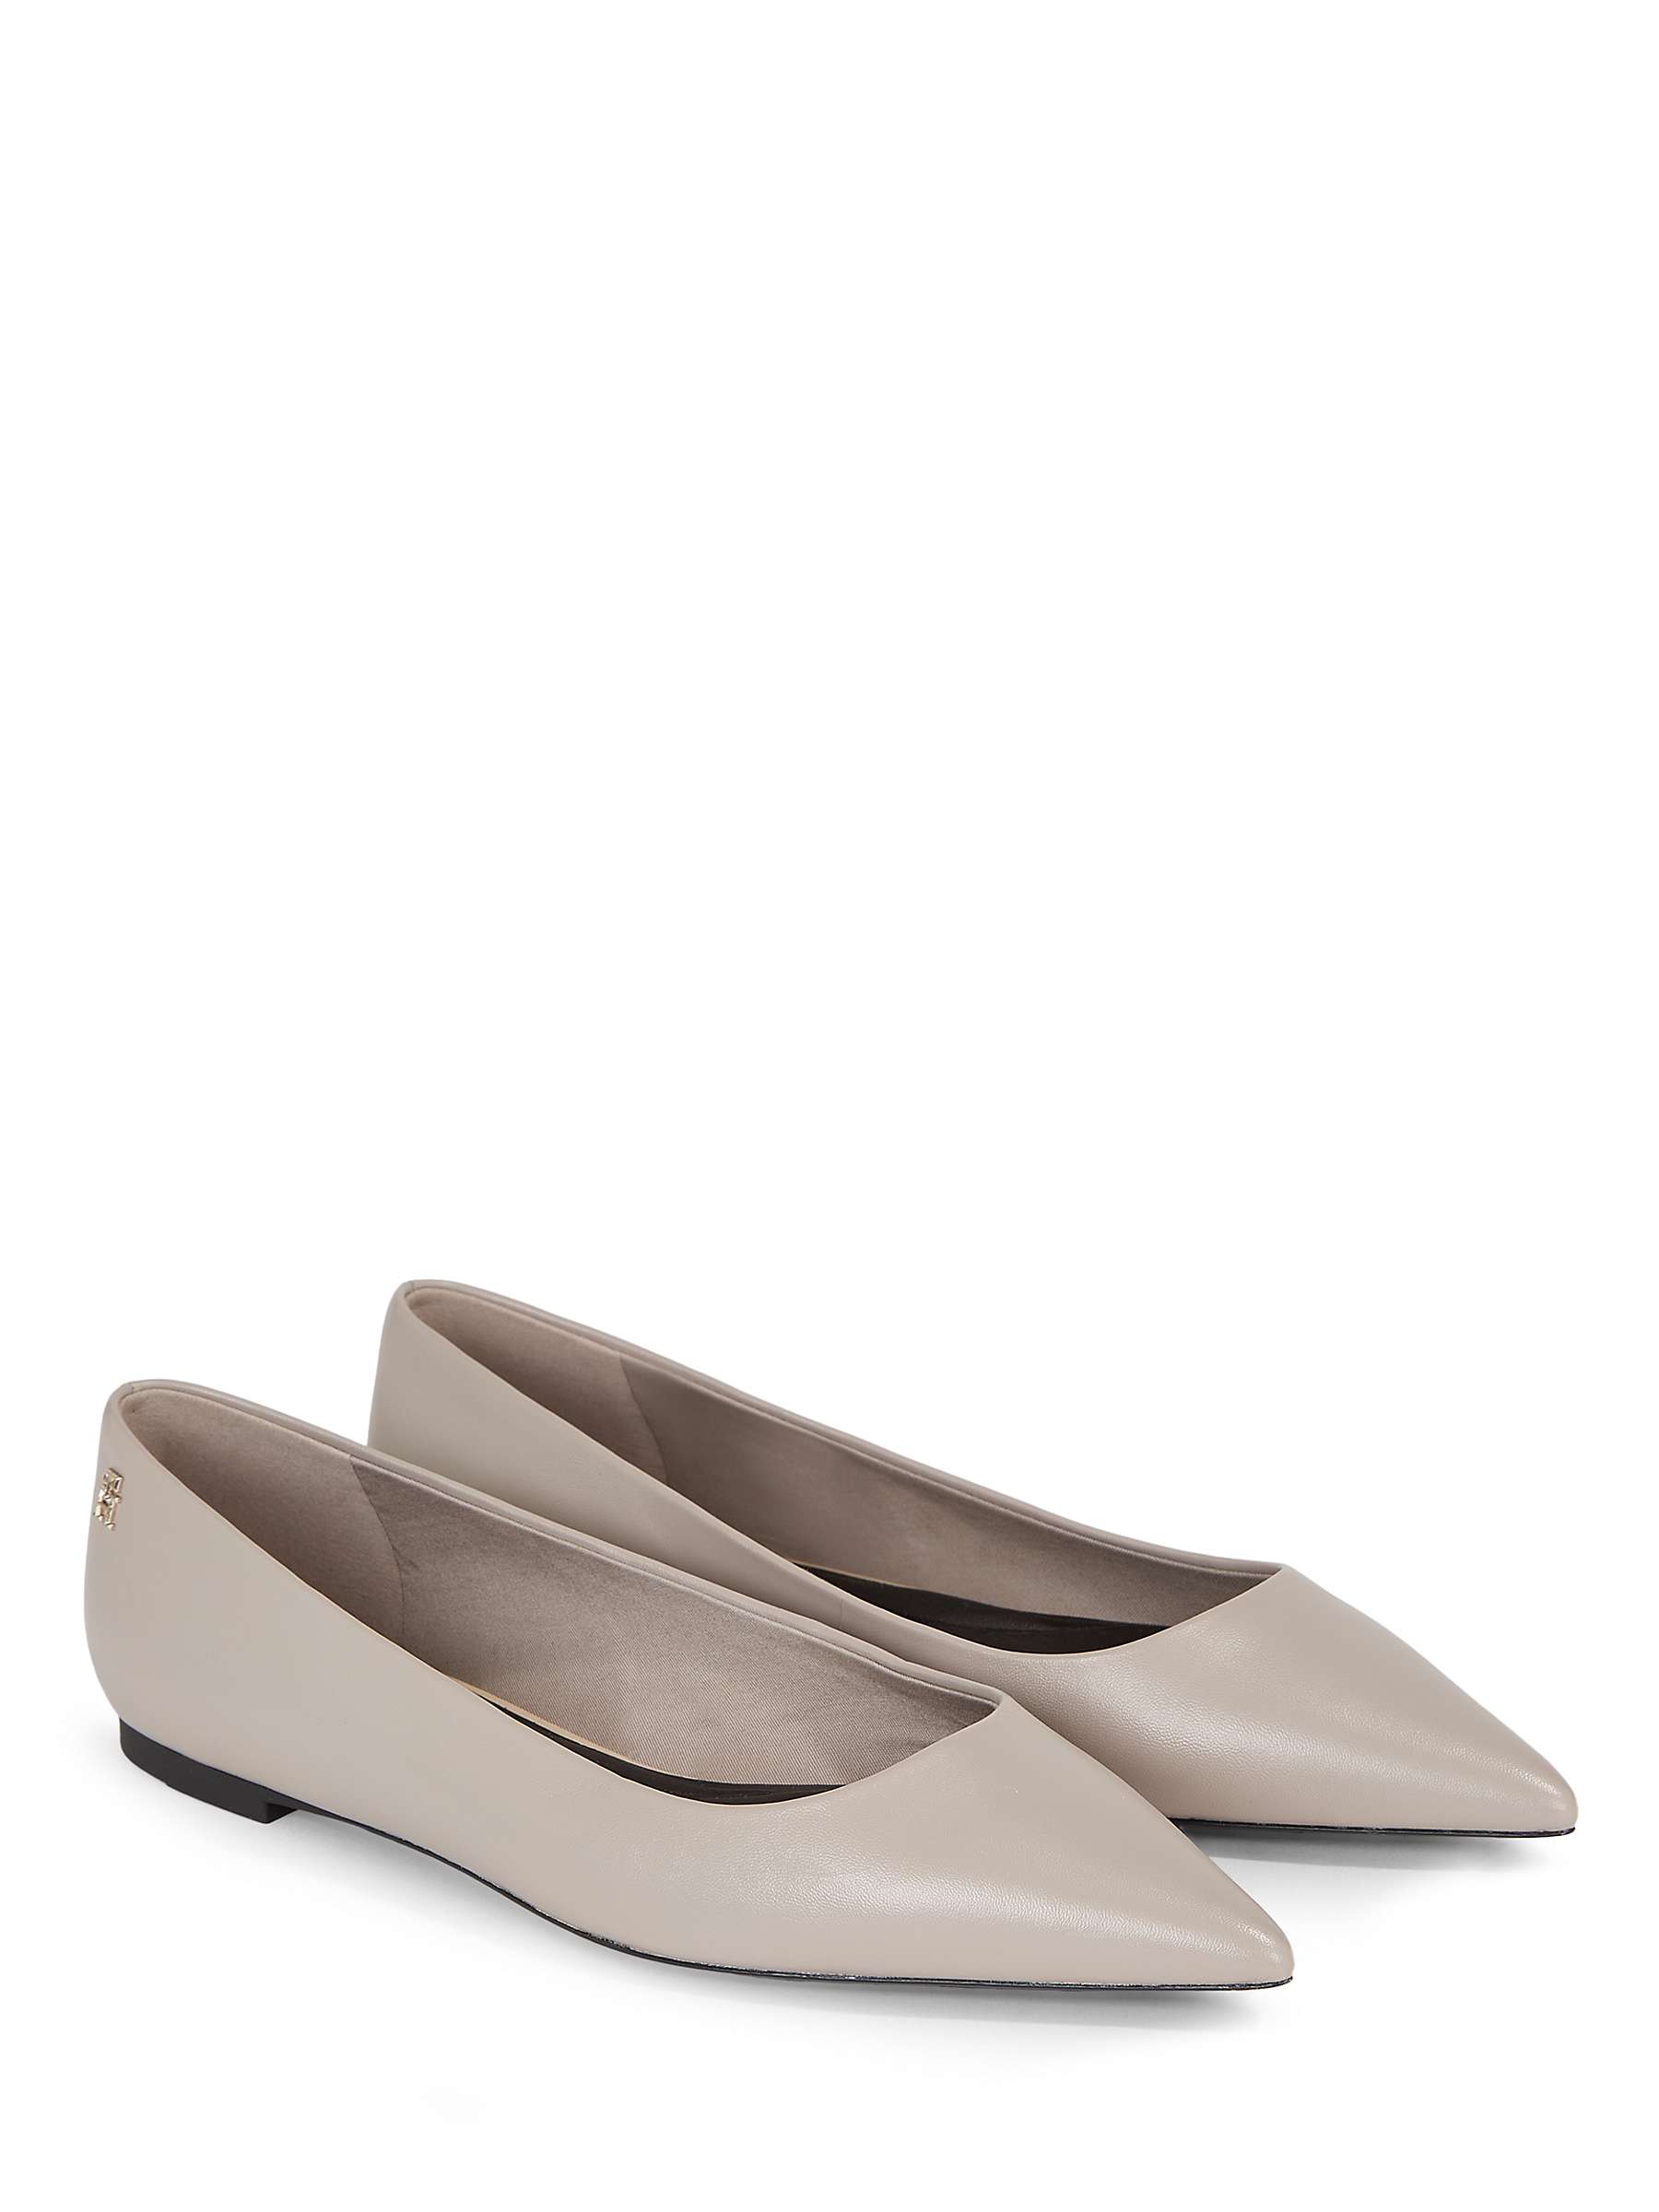 Buy Tommy Hilfiger Essential Pointed Toe Leather Pumps, Smooth Taupe Online at johnlewis.com